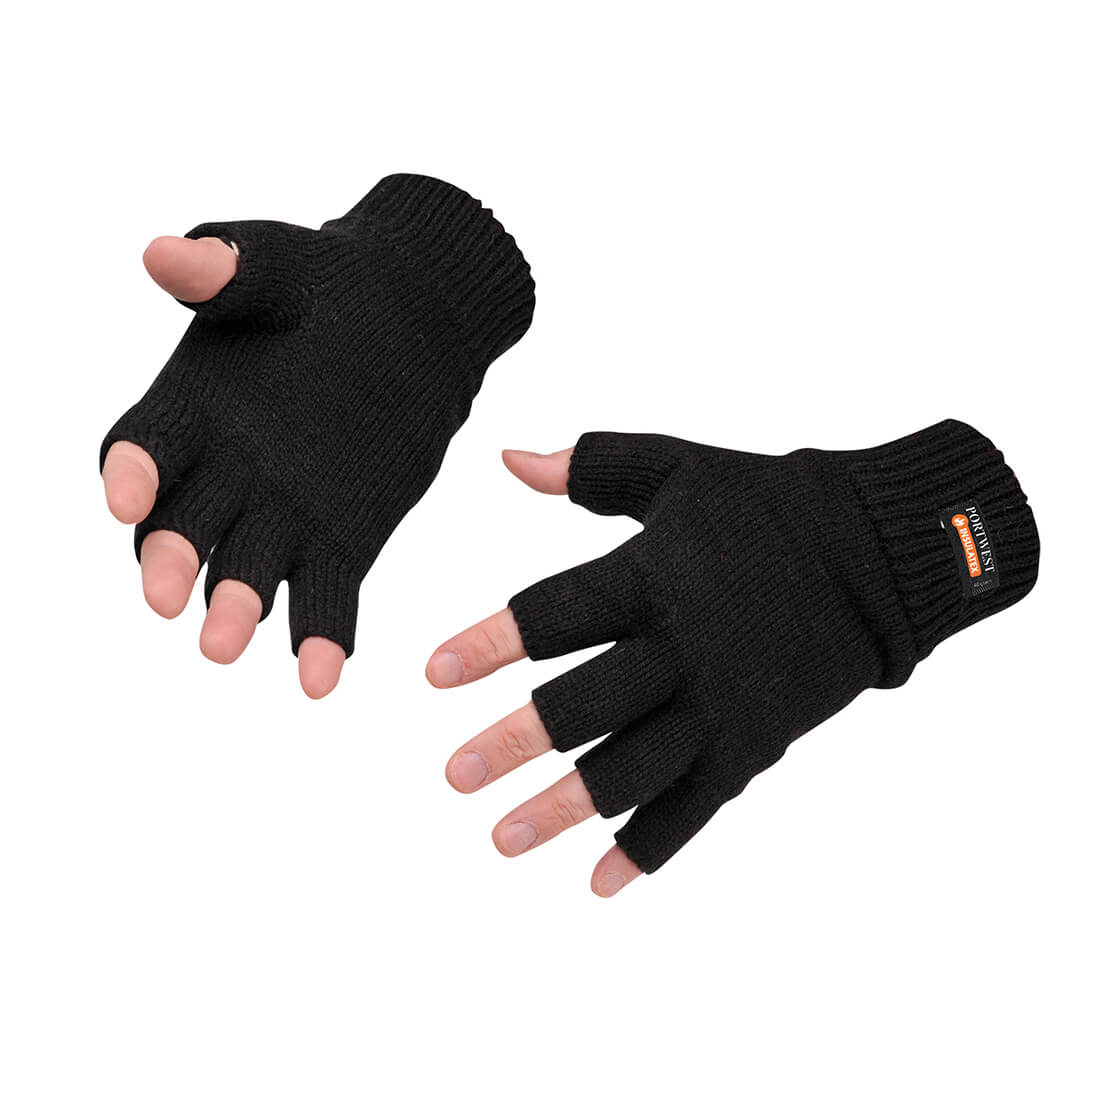 Image of Portwest Fingerless Insulatex Lined Knit Gloves Black One Size